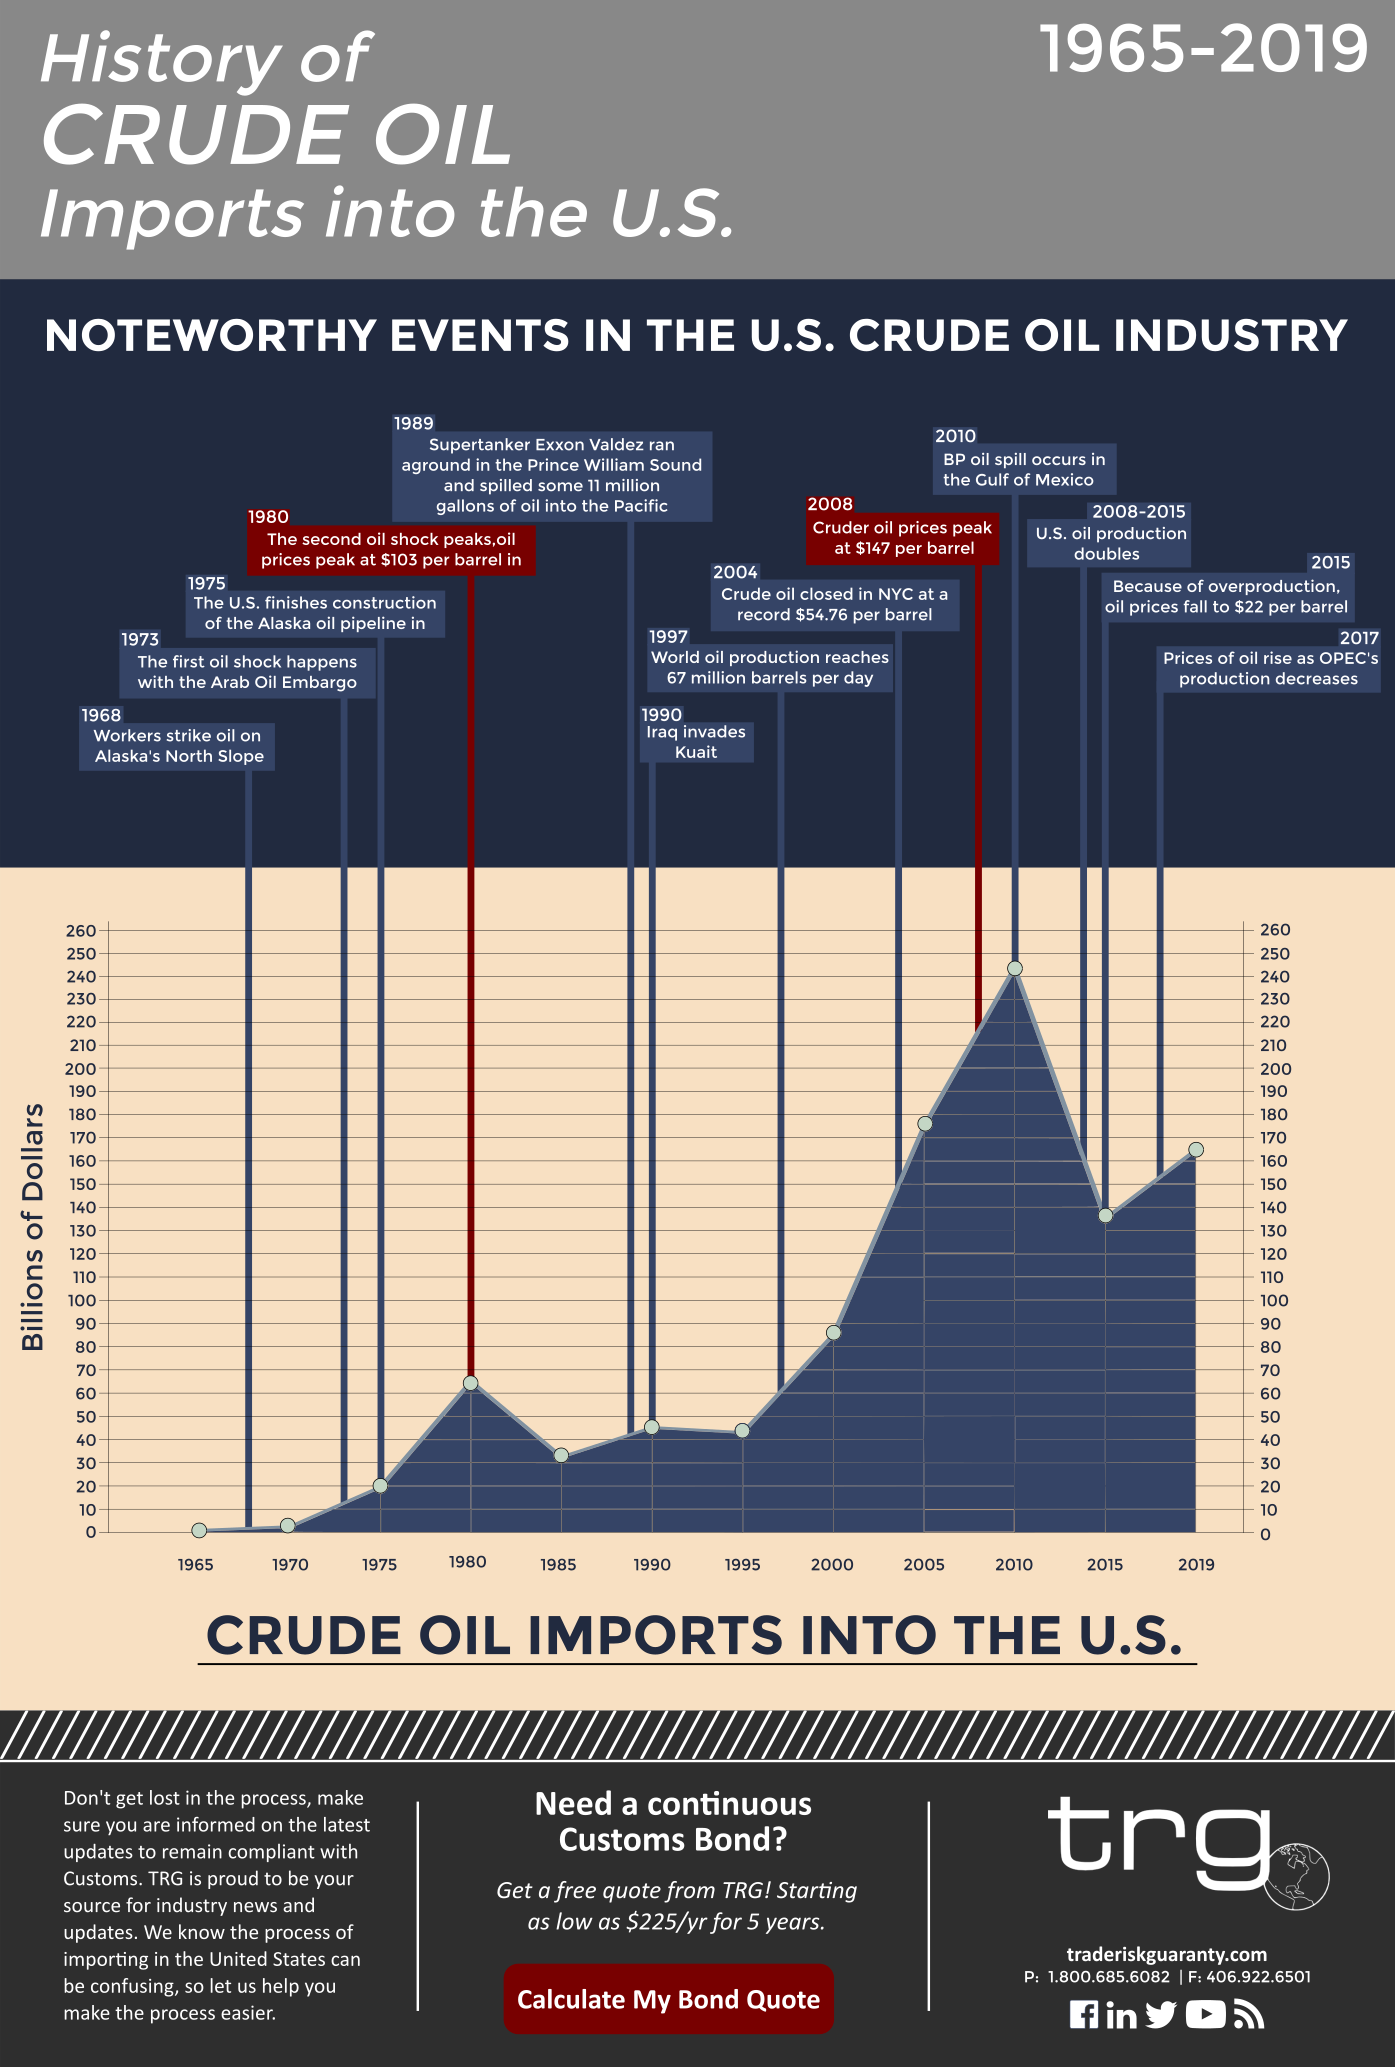 The Crude Oil trade is one of the largest in the world. Learn about how much Crude Oil is imported into the United States.